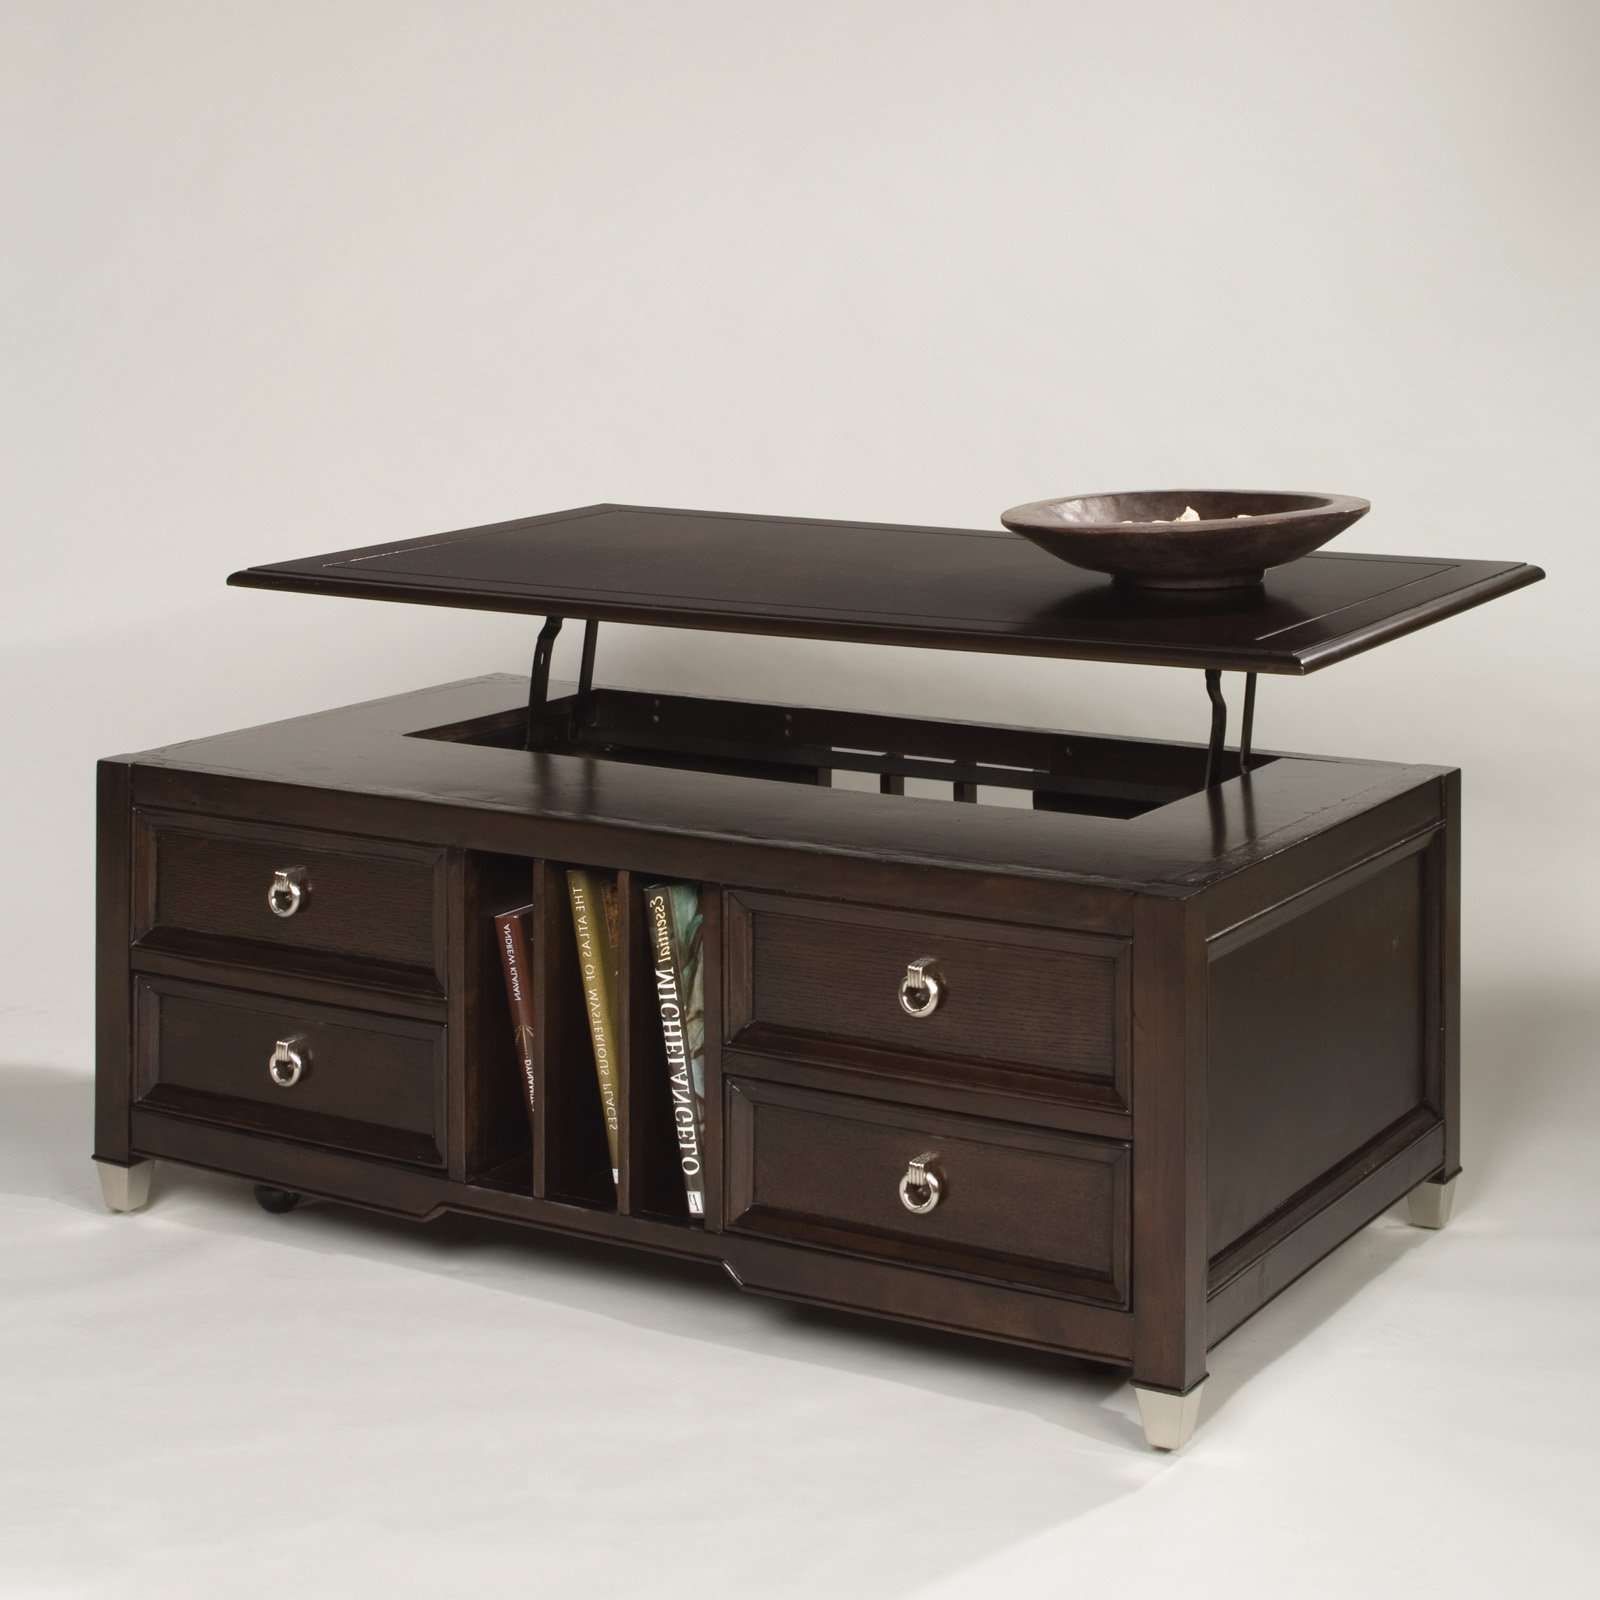 Well Liked Logan Lift Top Coffee Tables Throughout Coffee Tables : White Modern Lift Top Coffee Table Double Small (View 9 of 20)